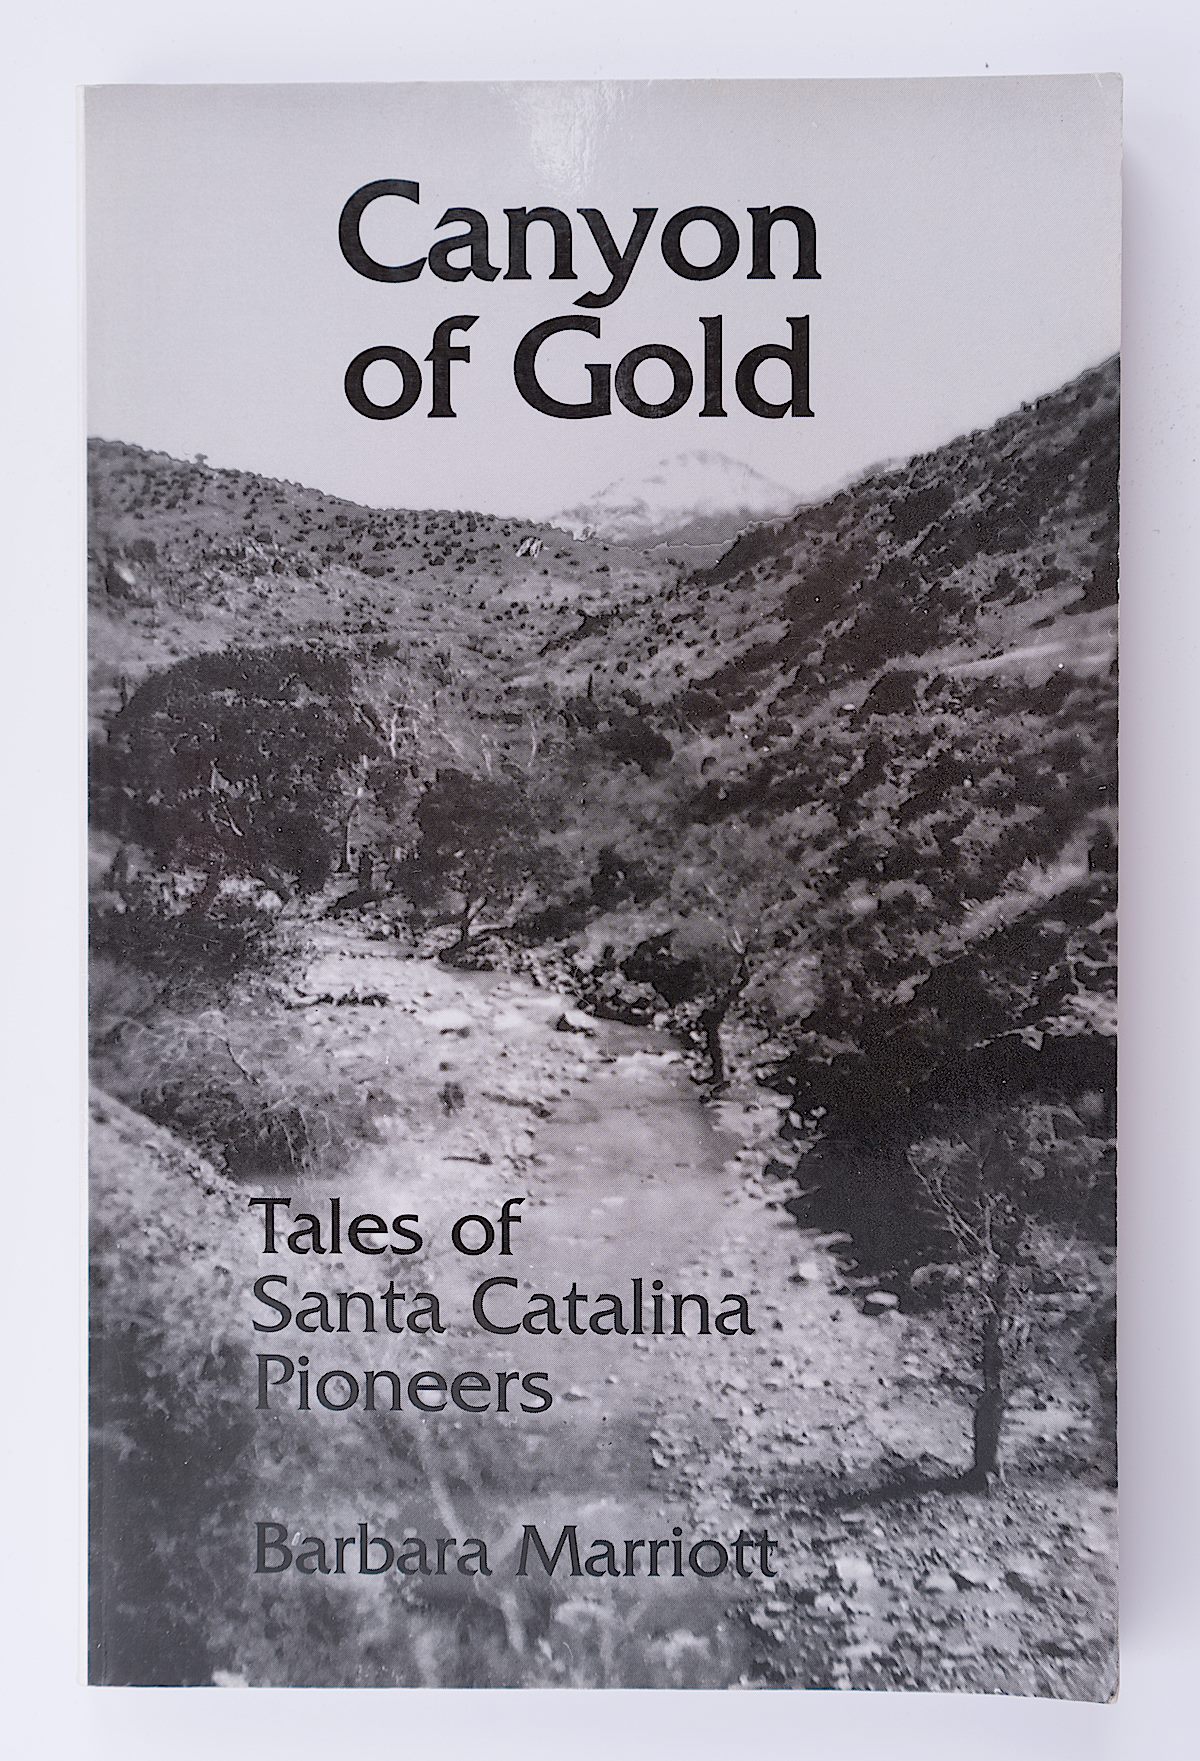 Canyon of Gold, Tales of Santa Catalina Pioneers, Barbara Marriott. March 2016.